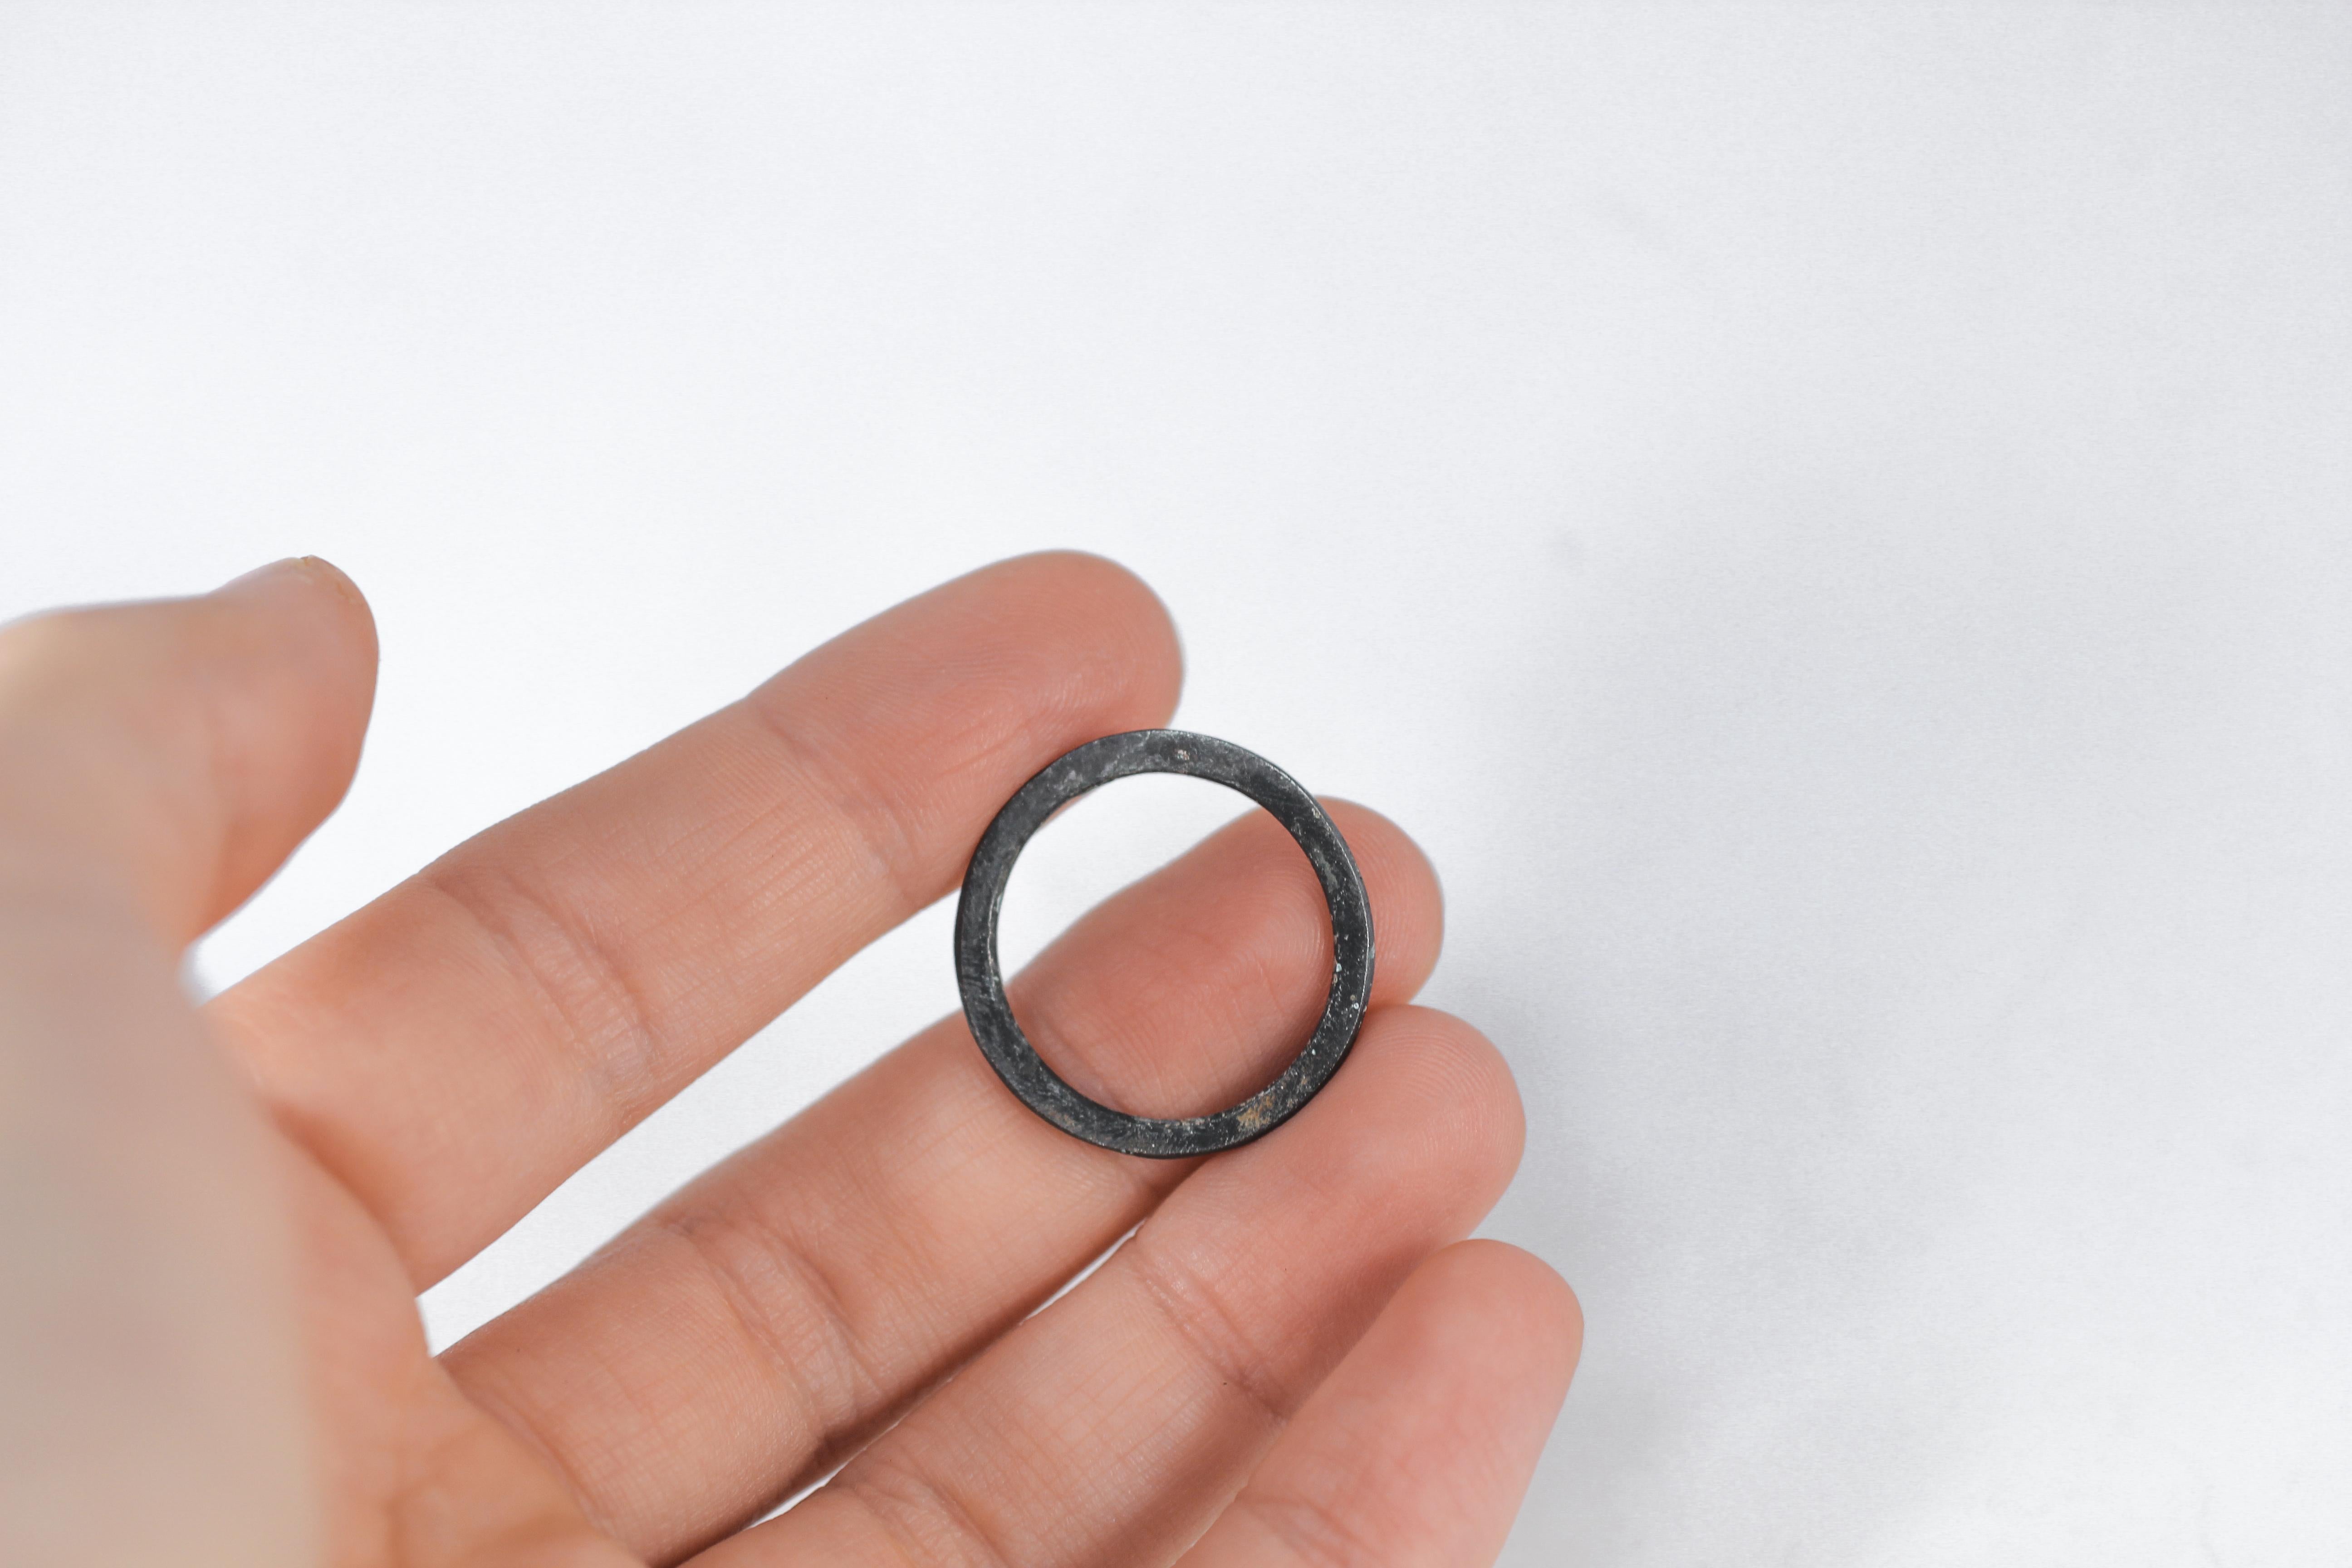 Fashion ring band in Simplicity Medium Disk contemporary design in oxidized/blackened sterling silver. Can be worn as a bridal or wedding ring or a stacking fashion ring.  

Process: This striking ring is first hand-forged in 21k gold, then cast in